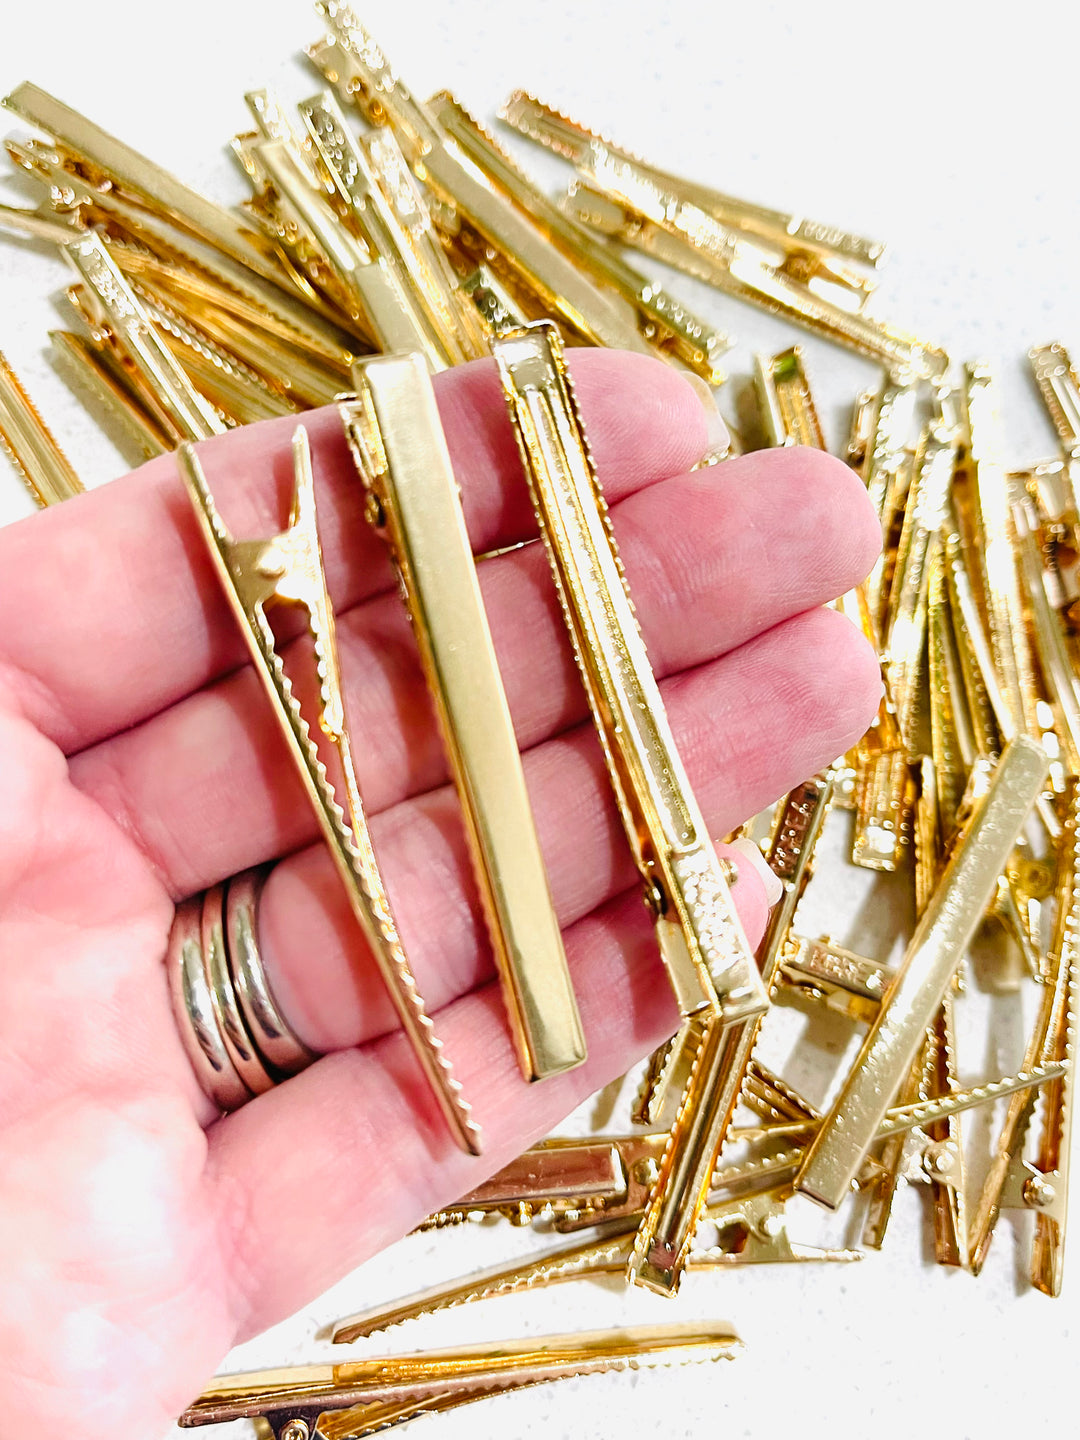 60mm Slim Gold Metal Hair Clips with Teeth - Skinny Alligator Clips - 60 x 6 x 11mm - 10 or 50 Pack